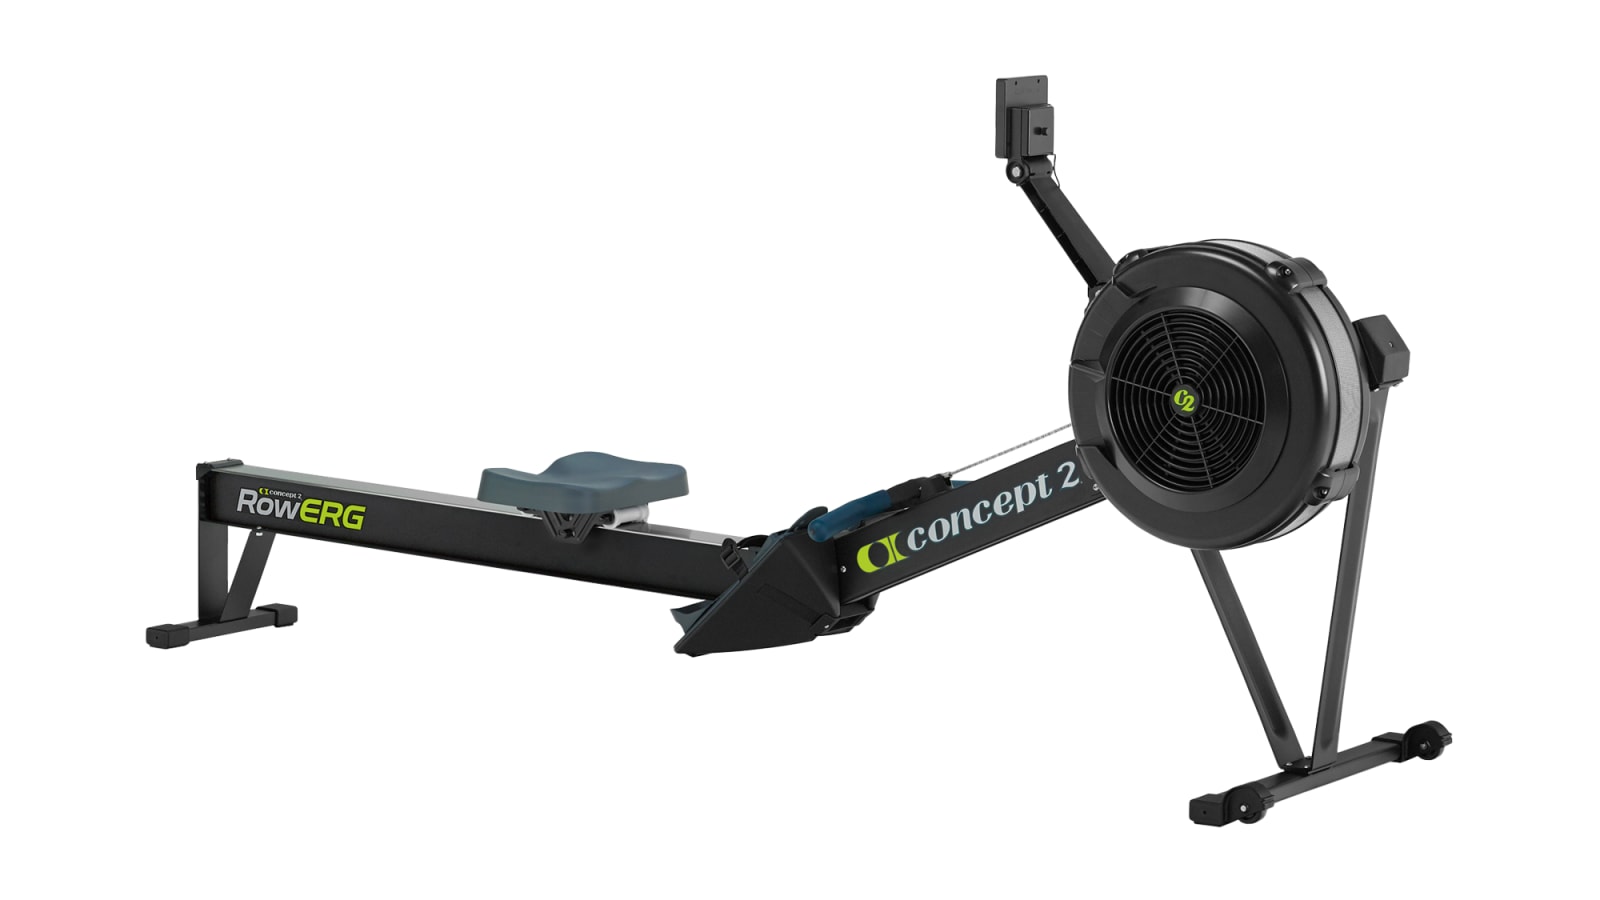 Black Concept 2 RowErg Rower - PM5 - Model D